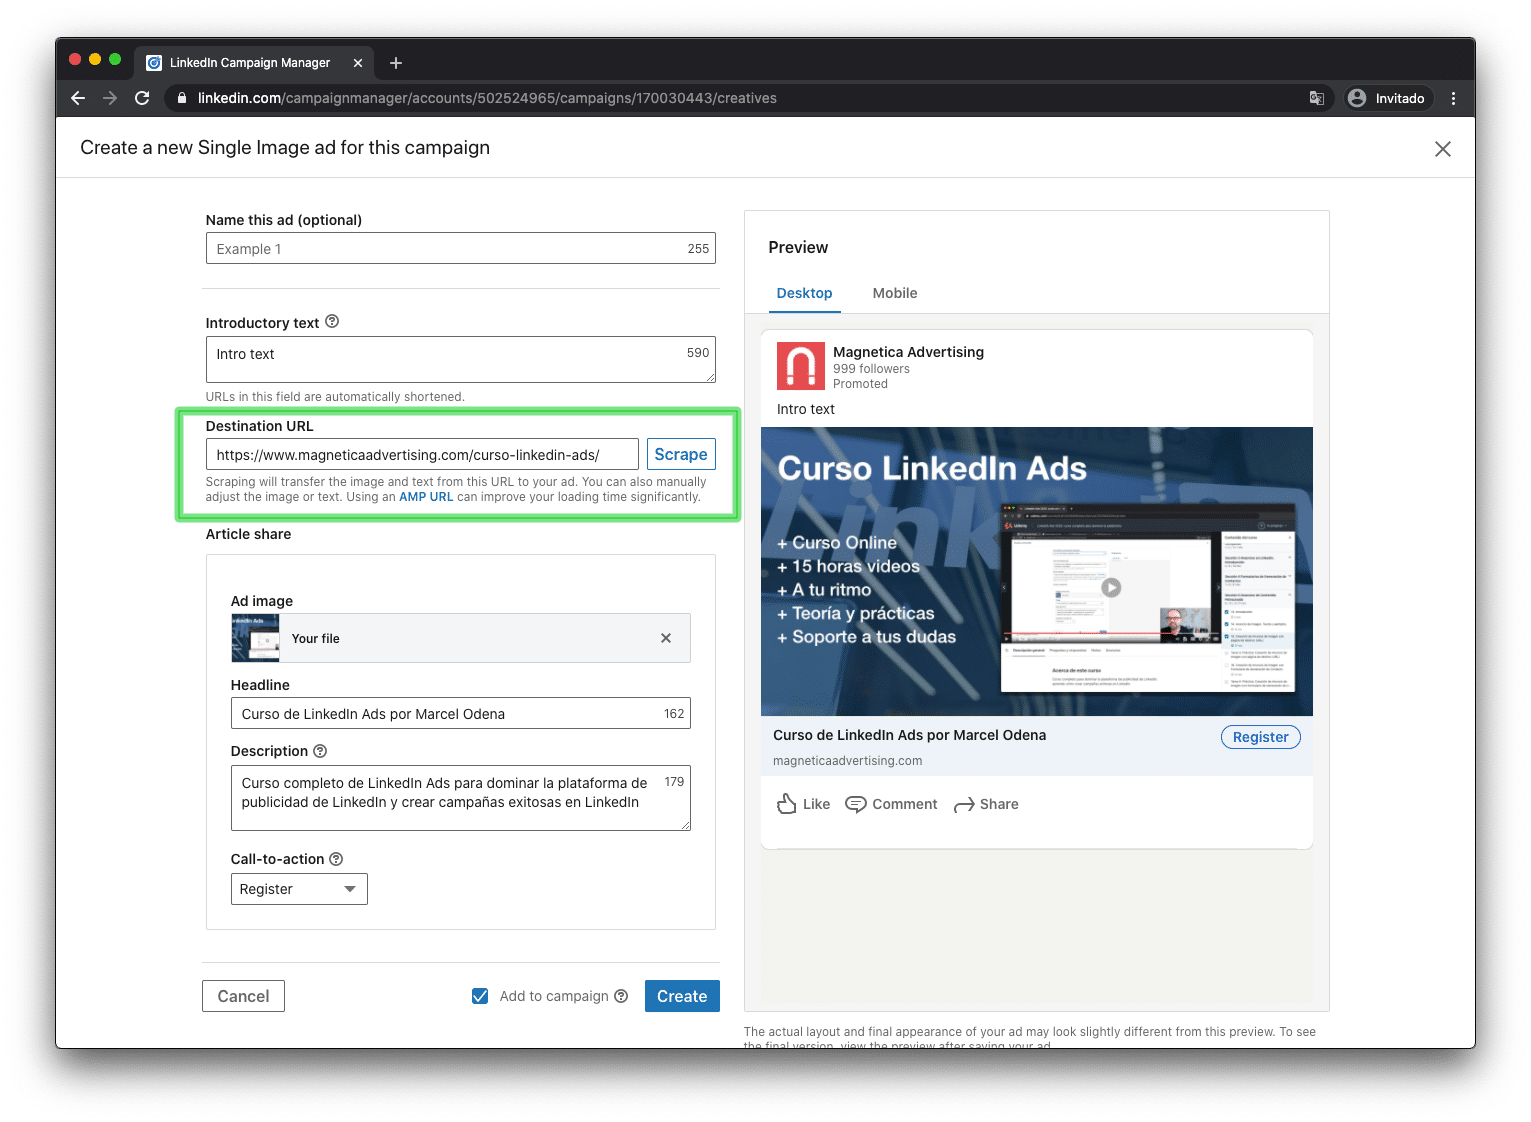 LinkedIn Ads News September 2020: Scrape option when editing an ad on LinkedIn Campaign Manager